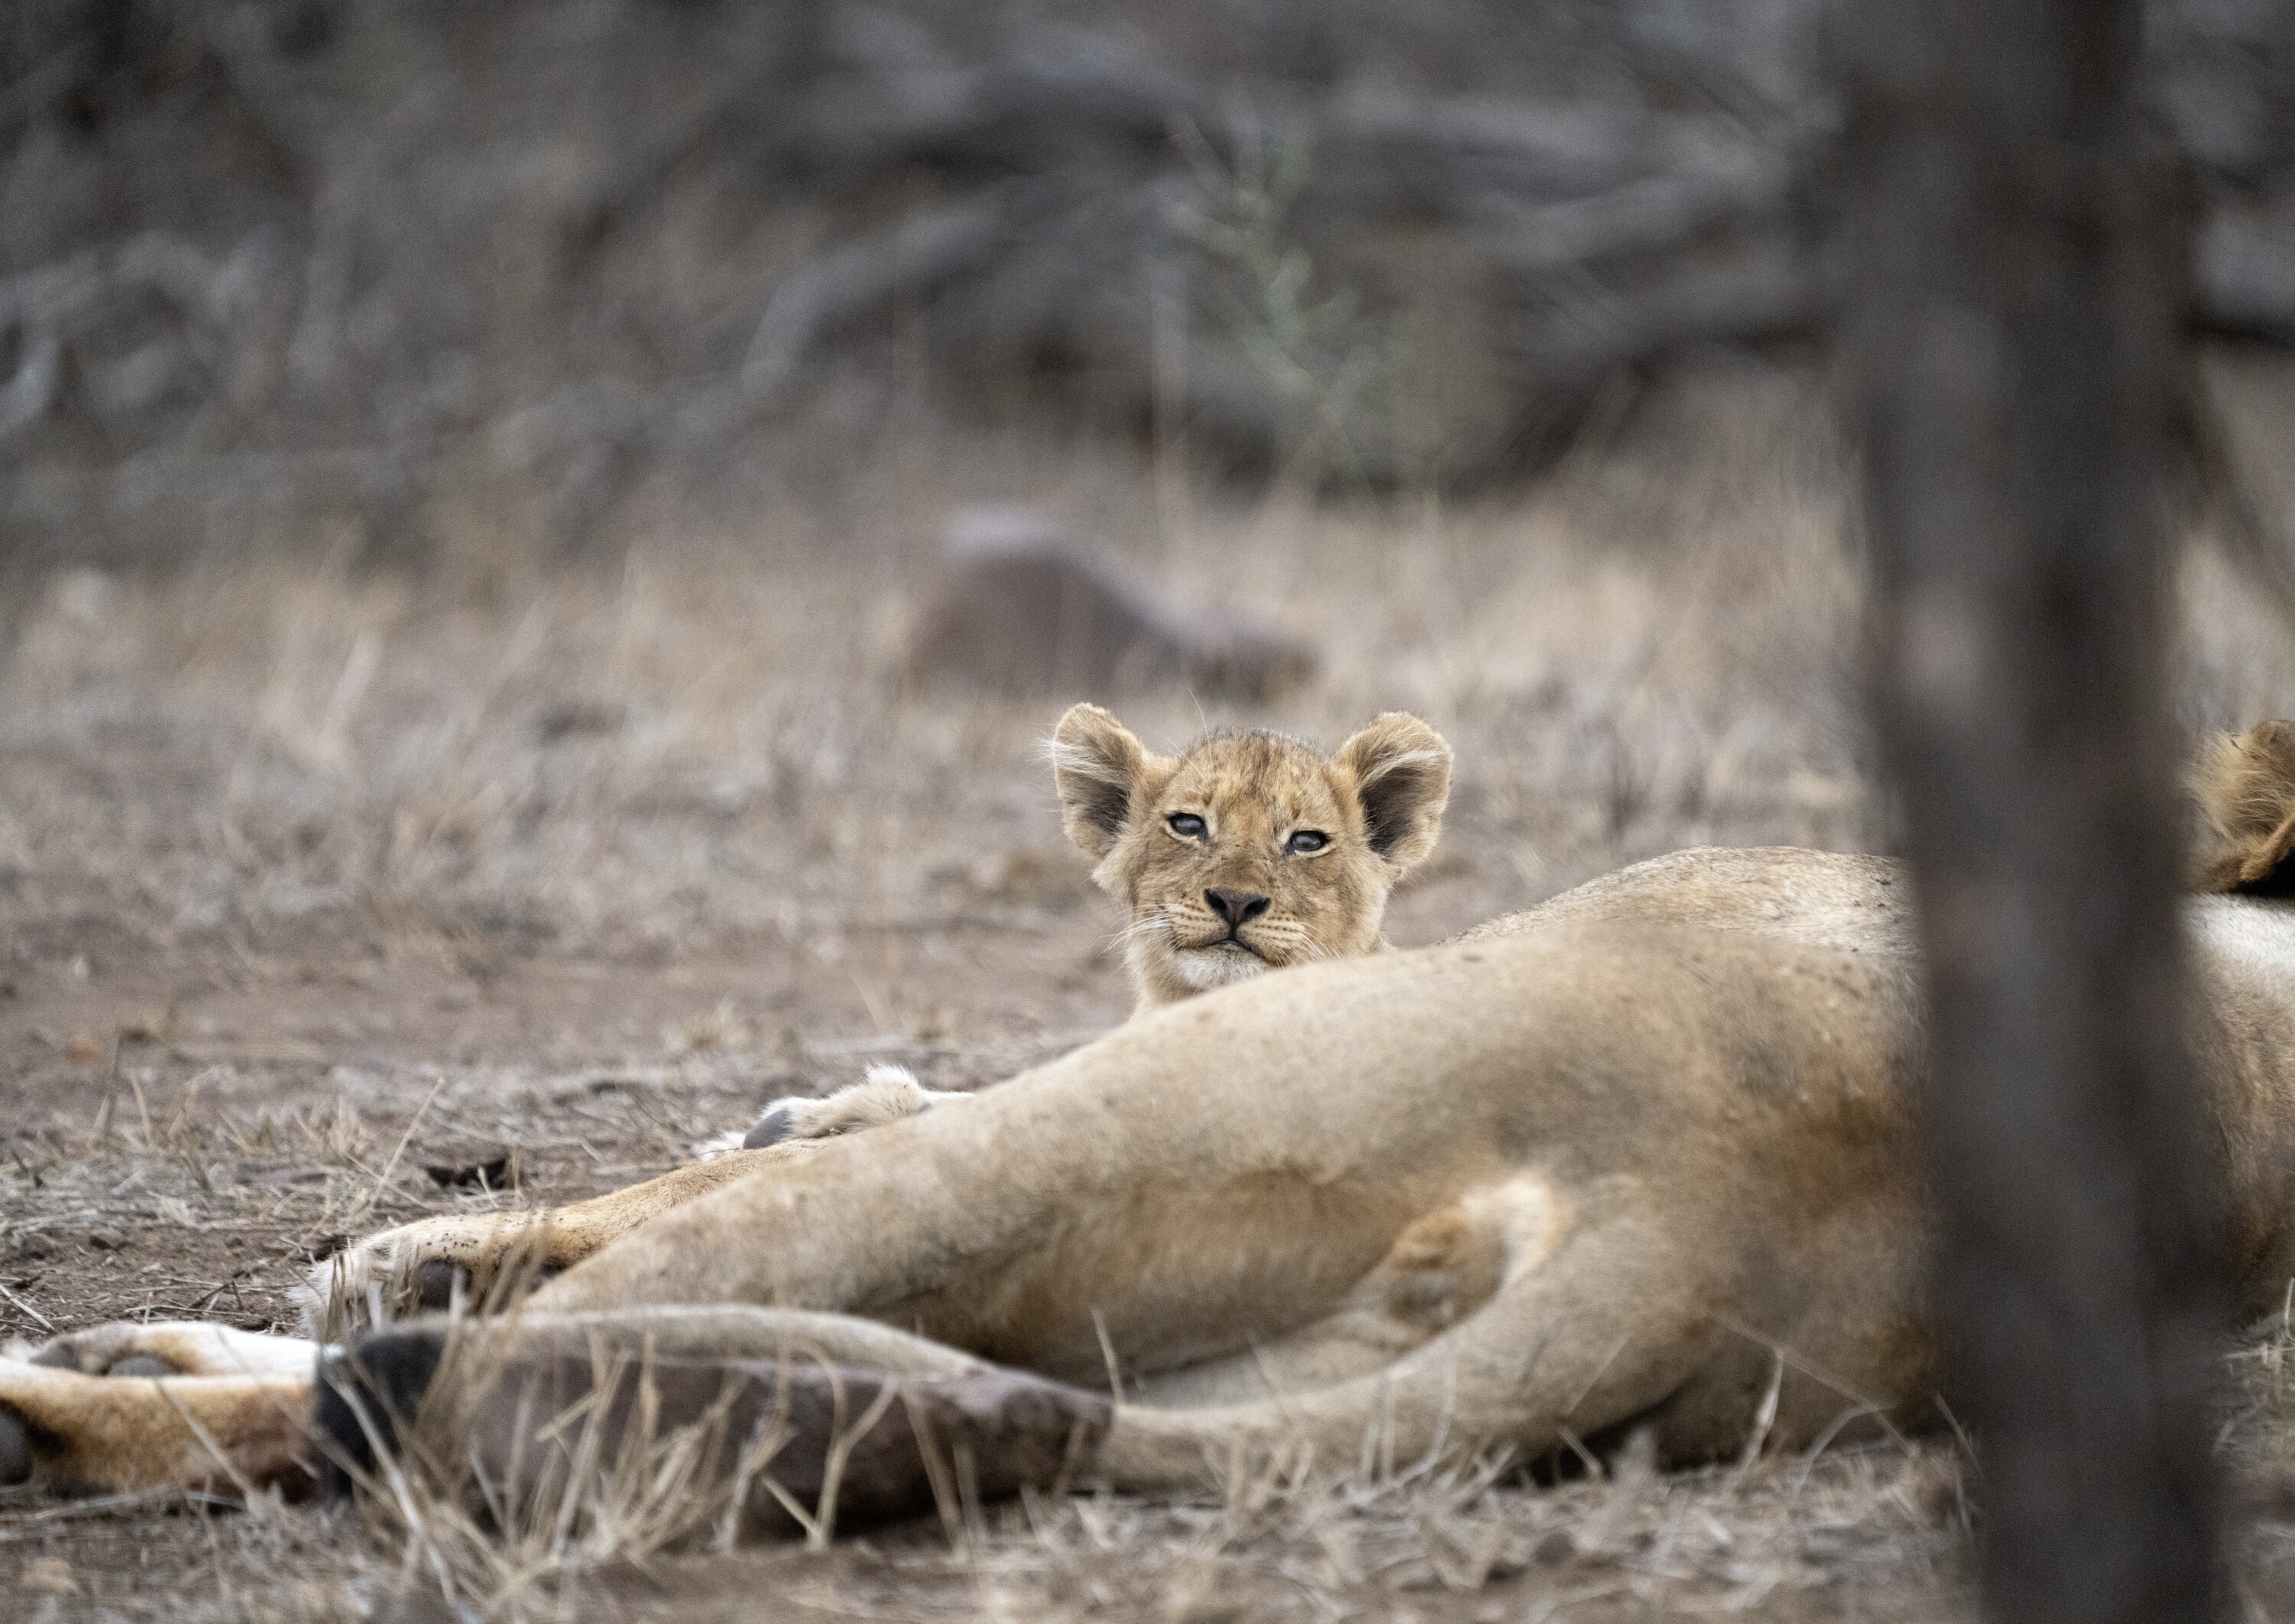 Malika rests with cub Issa. (National Geographic for Disney+/Russell MacLaughlin)